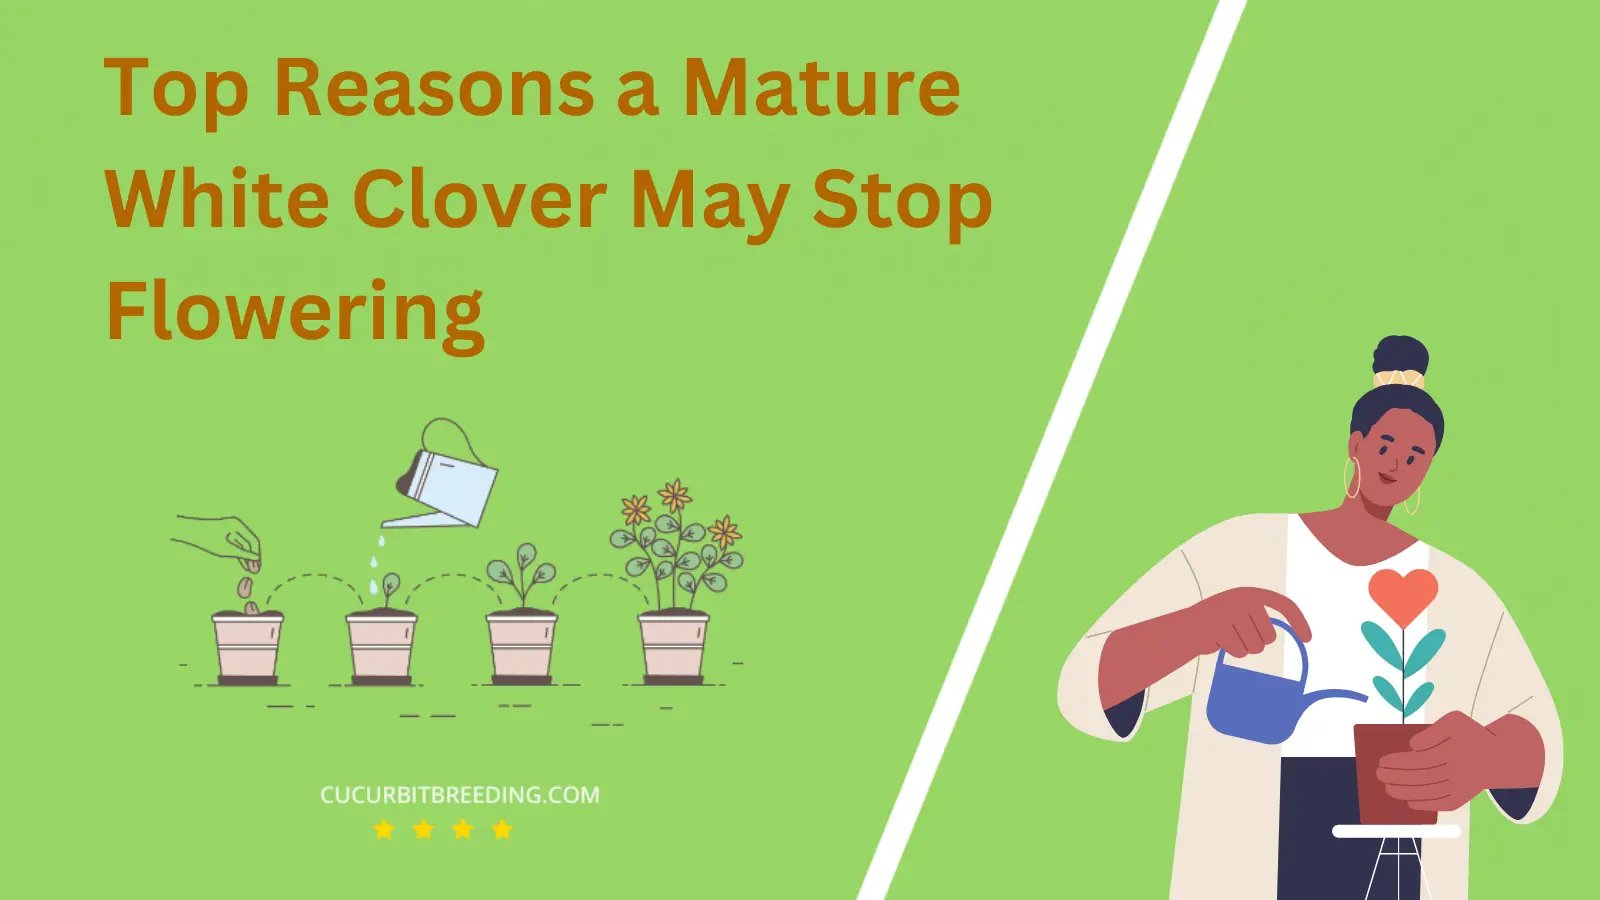 Top Reasons a Mature White Clover May Stop Flowering